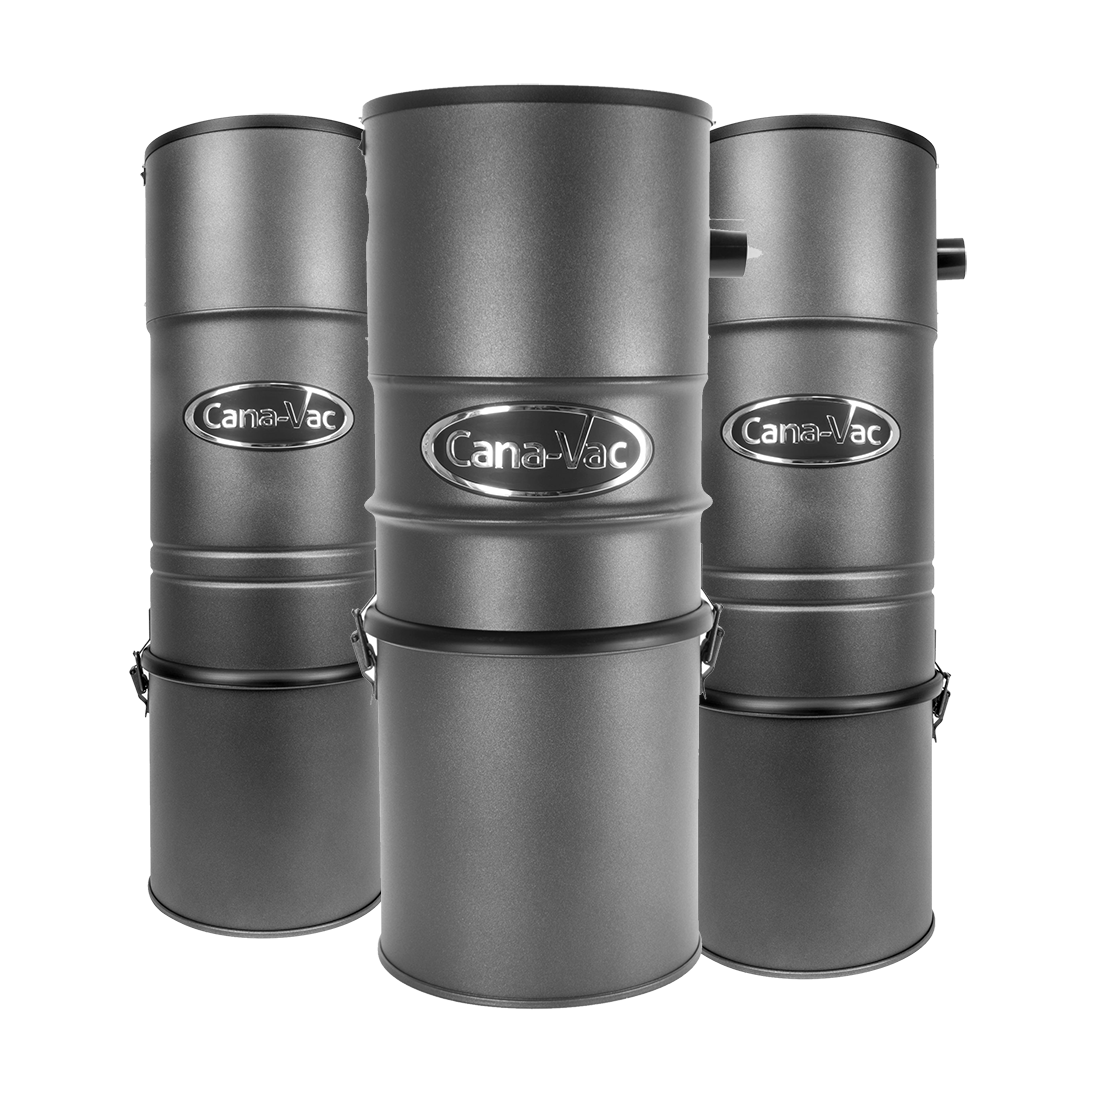 Cana-Vac Central Vacuum Systems